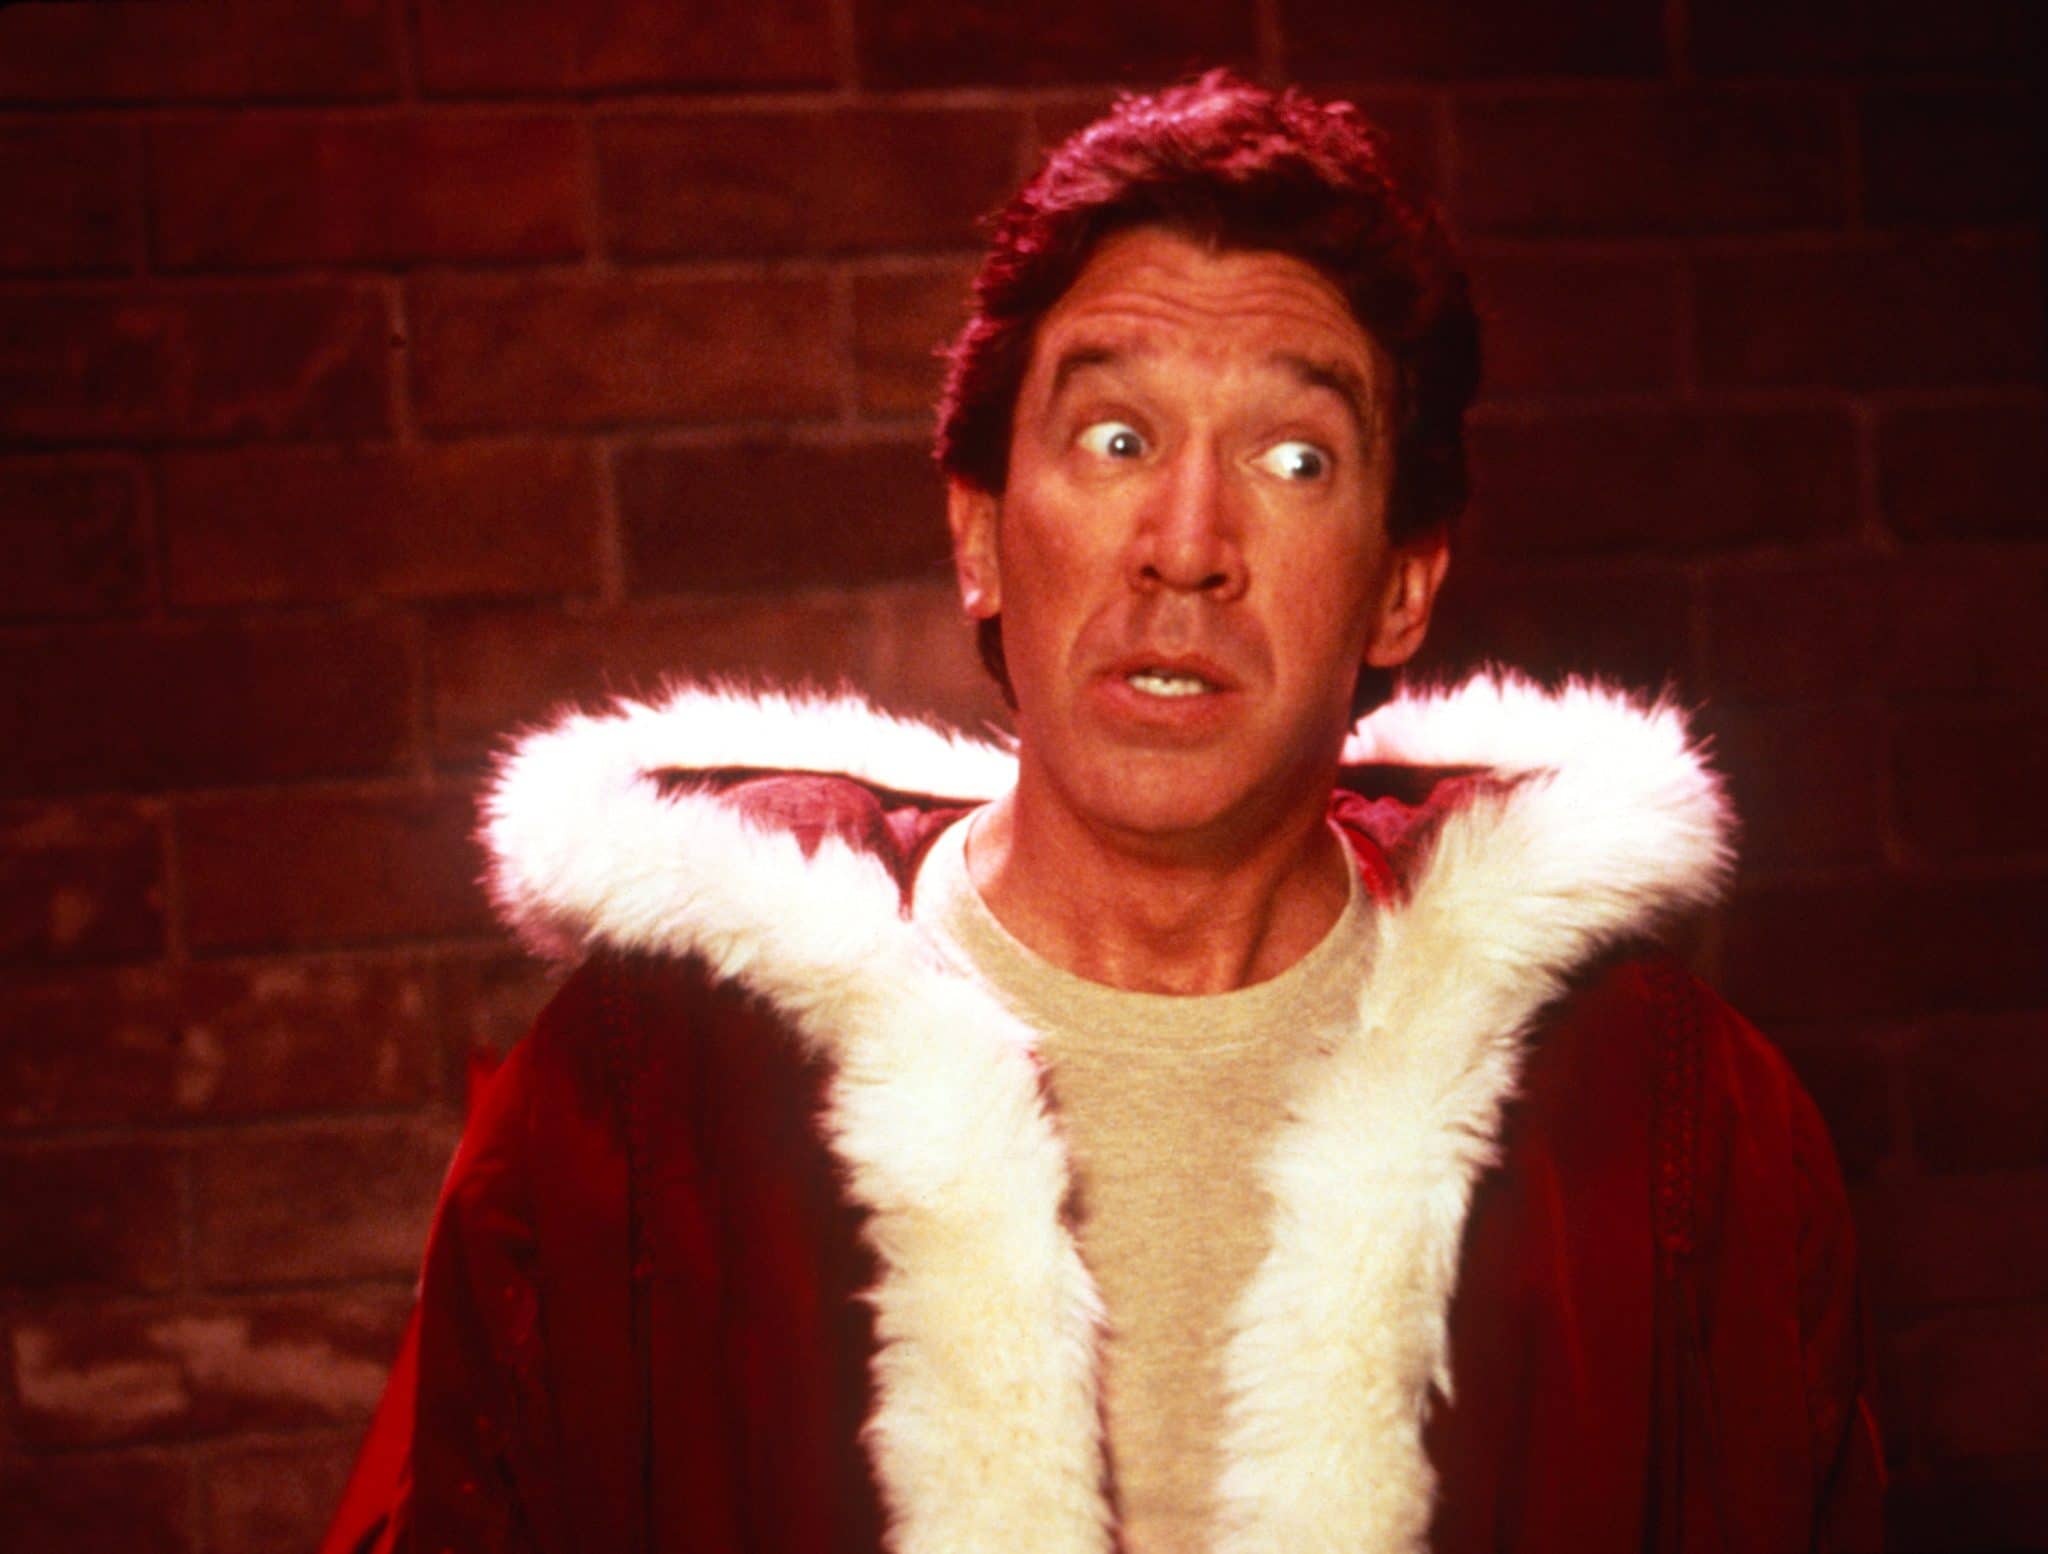 The Santa Clause Star Tim Allen Wants Everyone To Be Good For Goodness Sake This Christmas